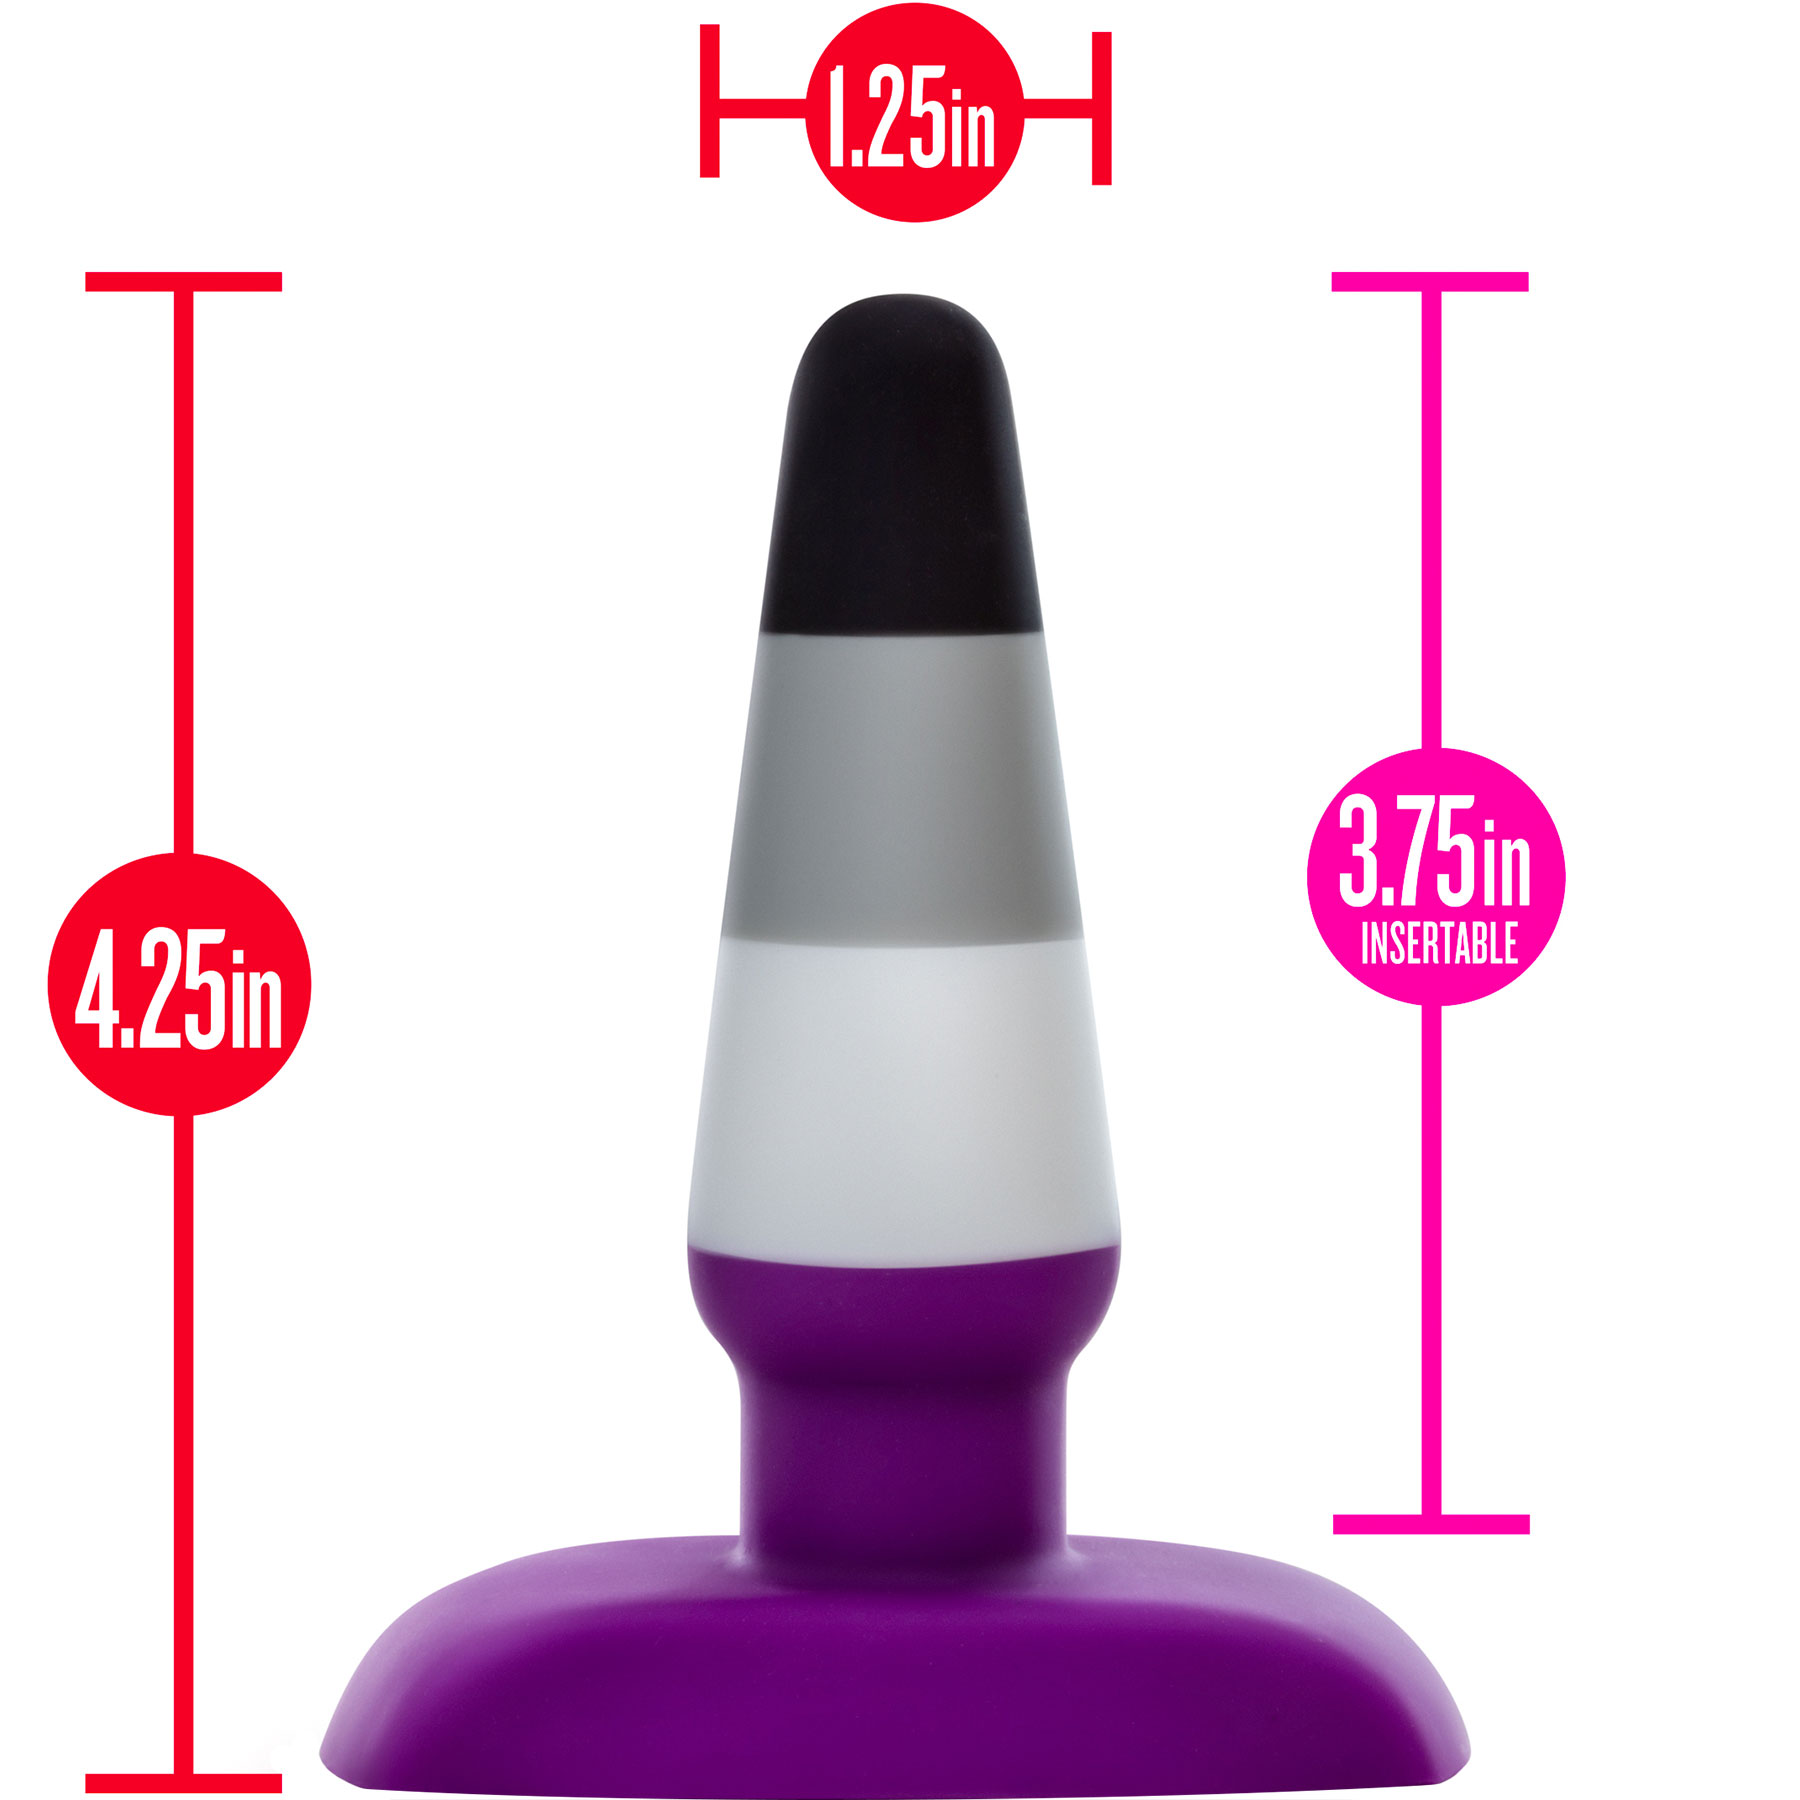 Avant Pride P7 Ace Silicone Butt Plug Features